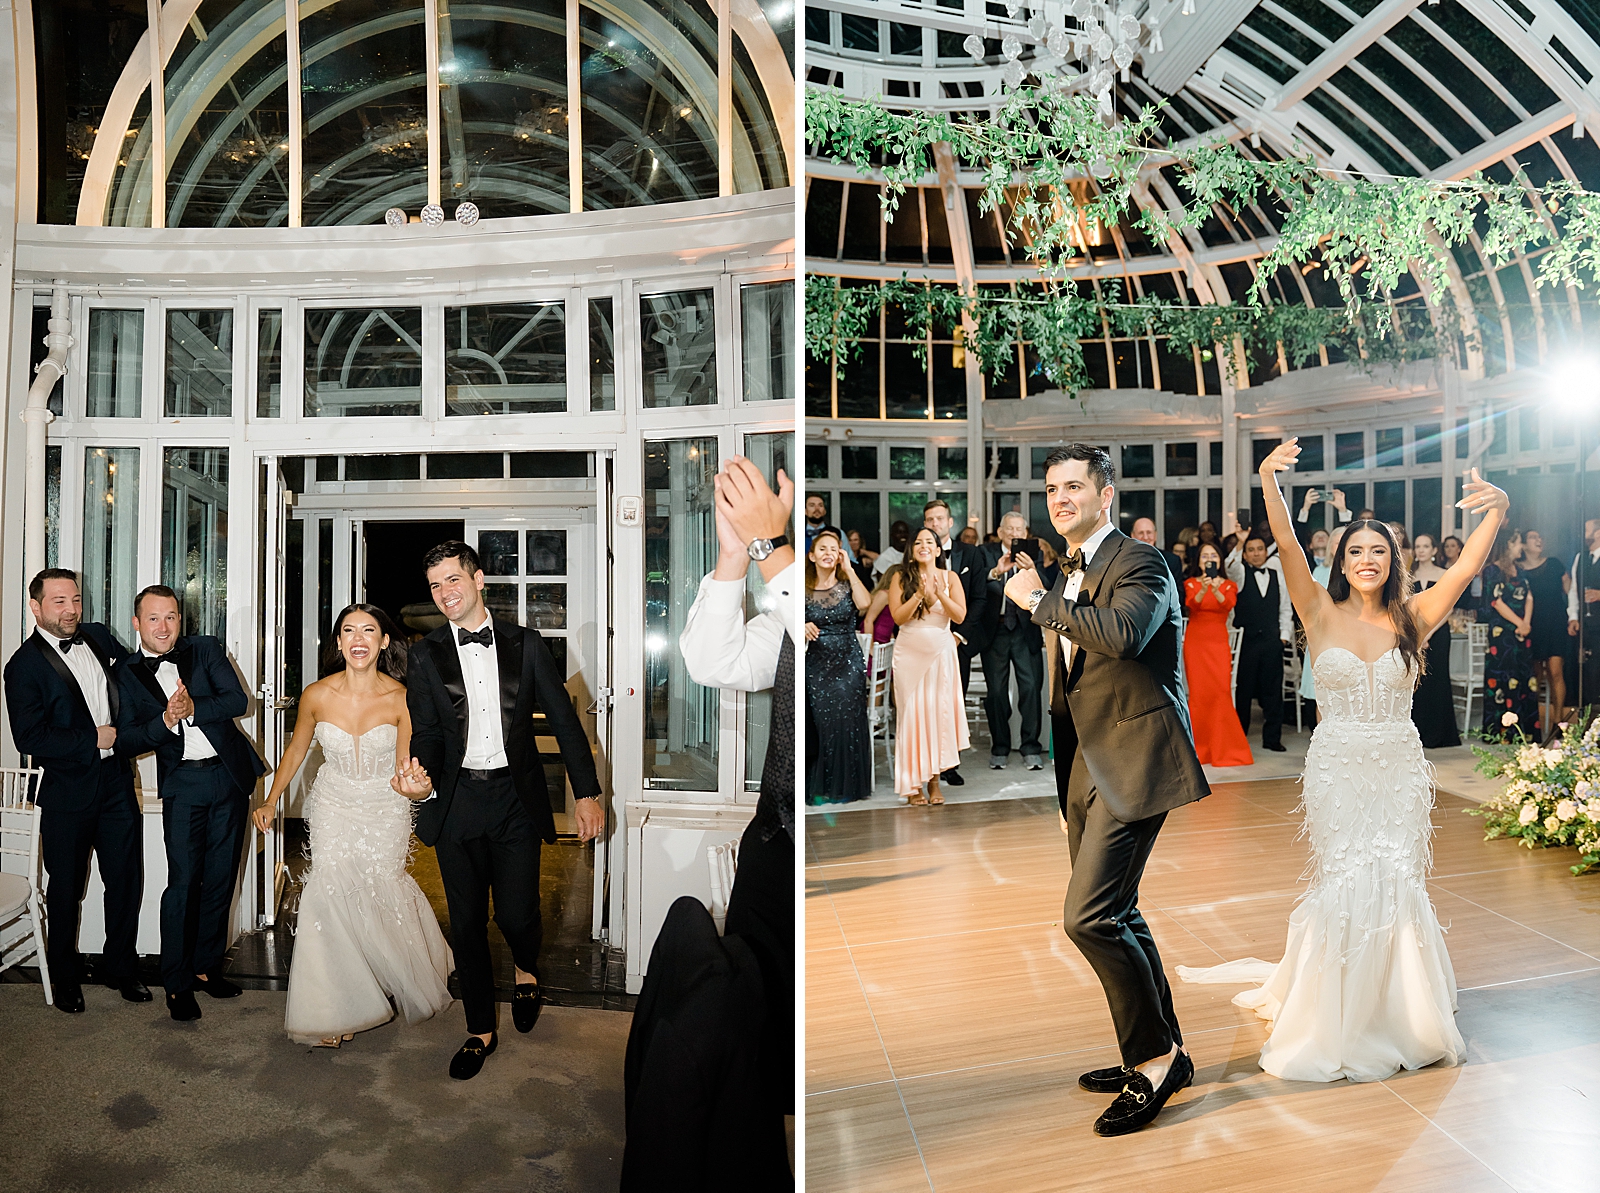 Left photo: Shot of the bride and groom smiling wide as they make their reception entrance. 
Right photo: Shot of the bride and groom hyping everyone up from the dance floor. 